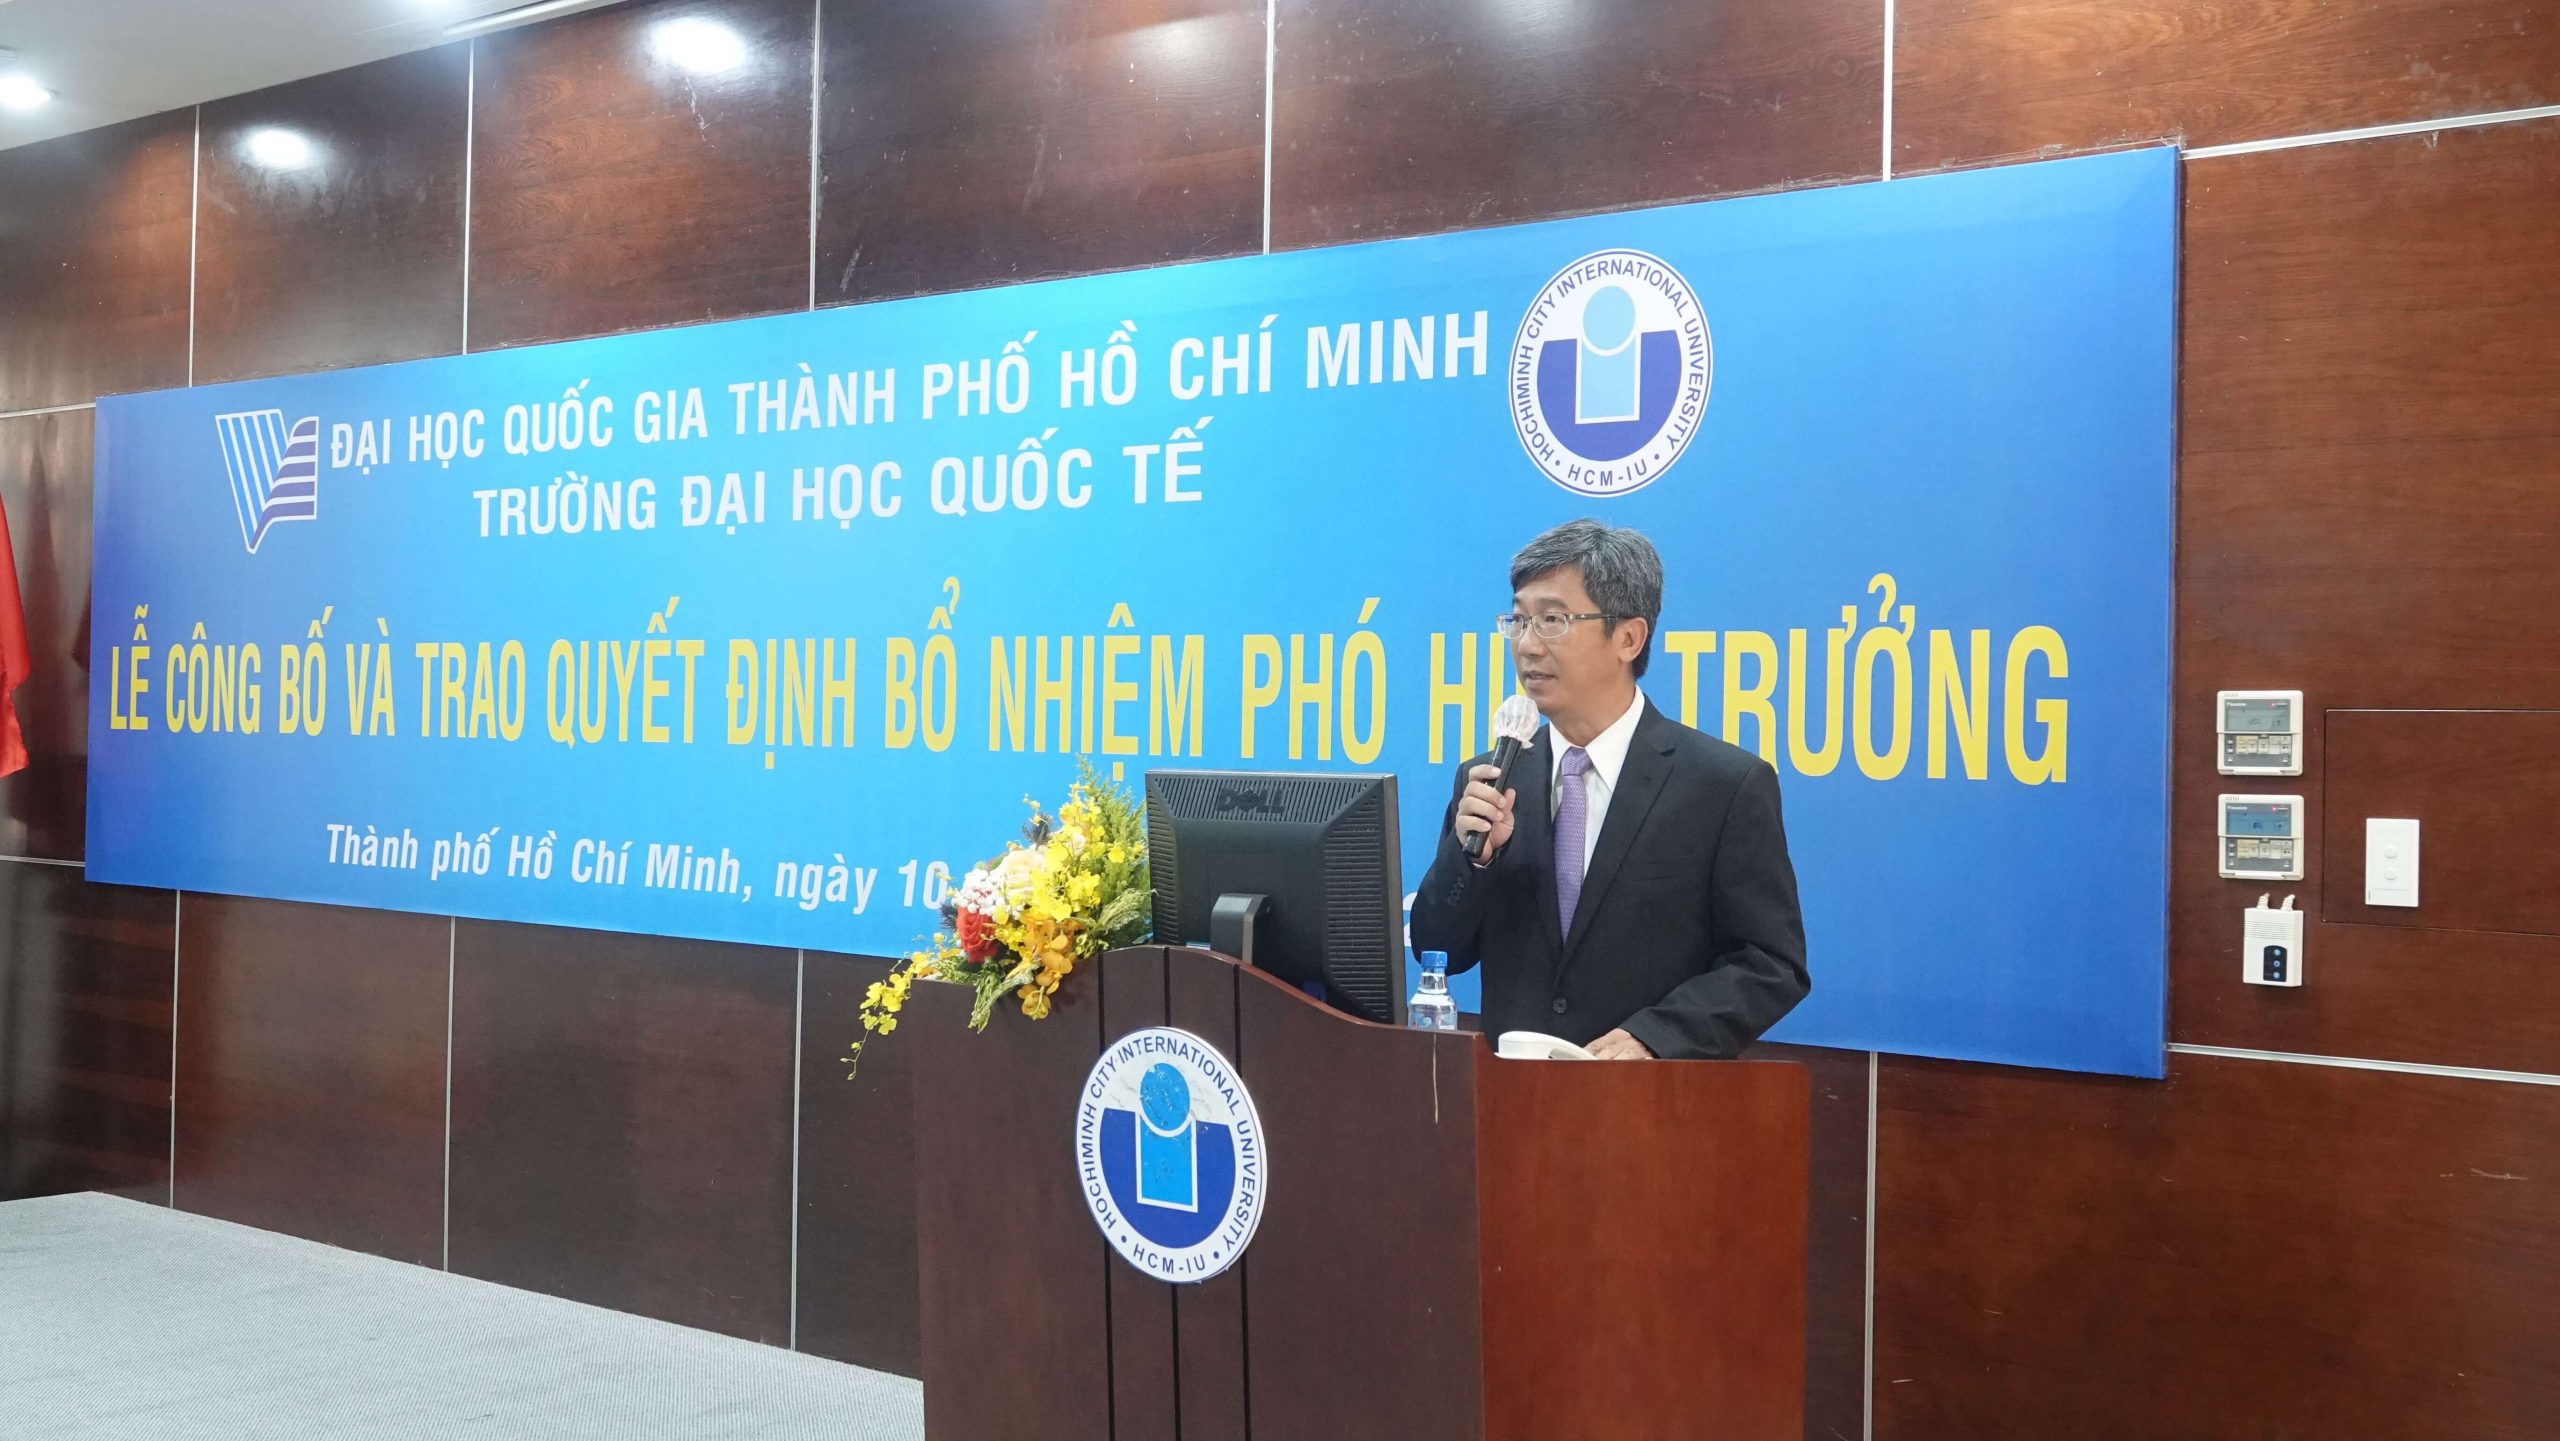 INTERNATIONAL UNIVERSITY WELCOMES NEW VICE RECTOR